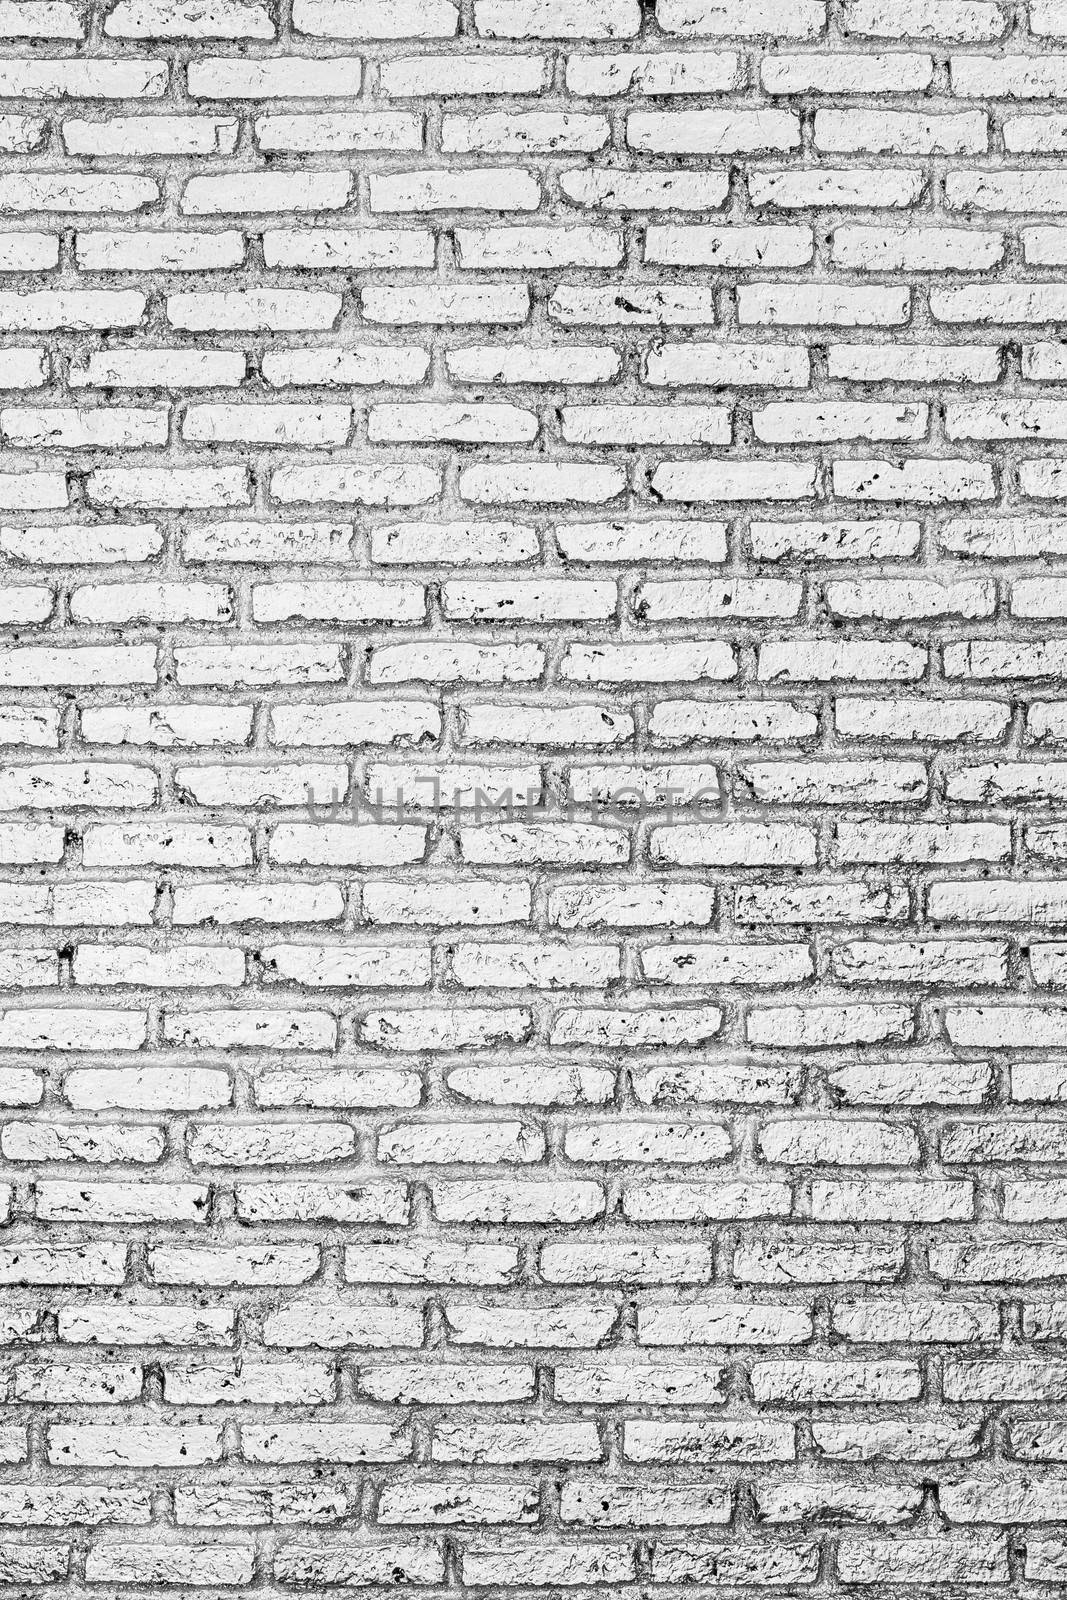 Silver painted brick wall background